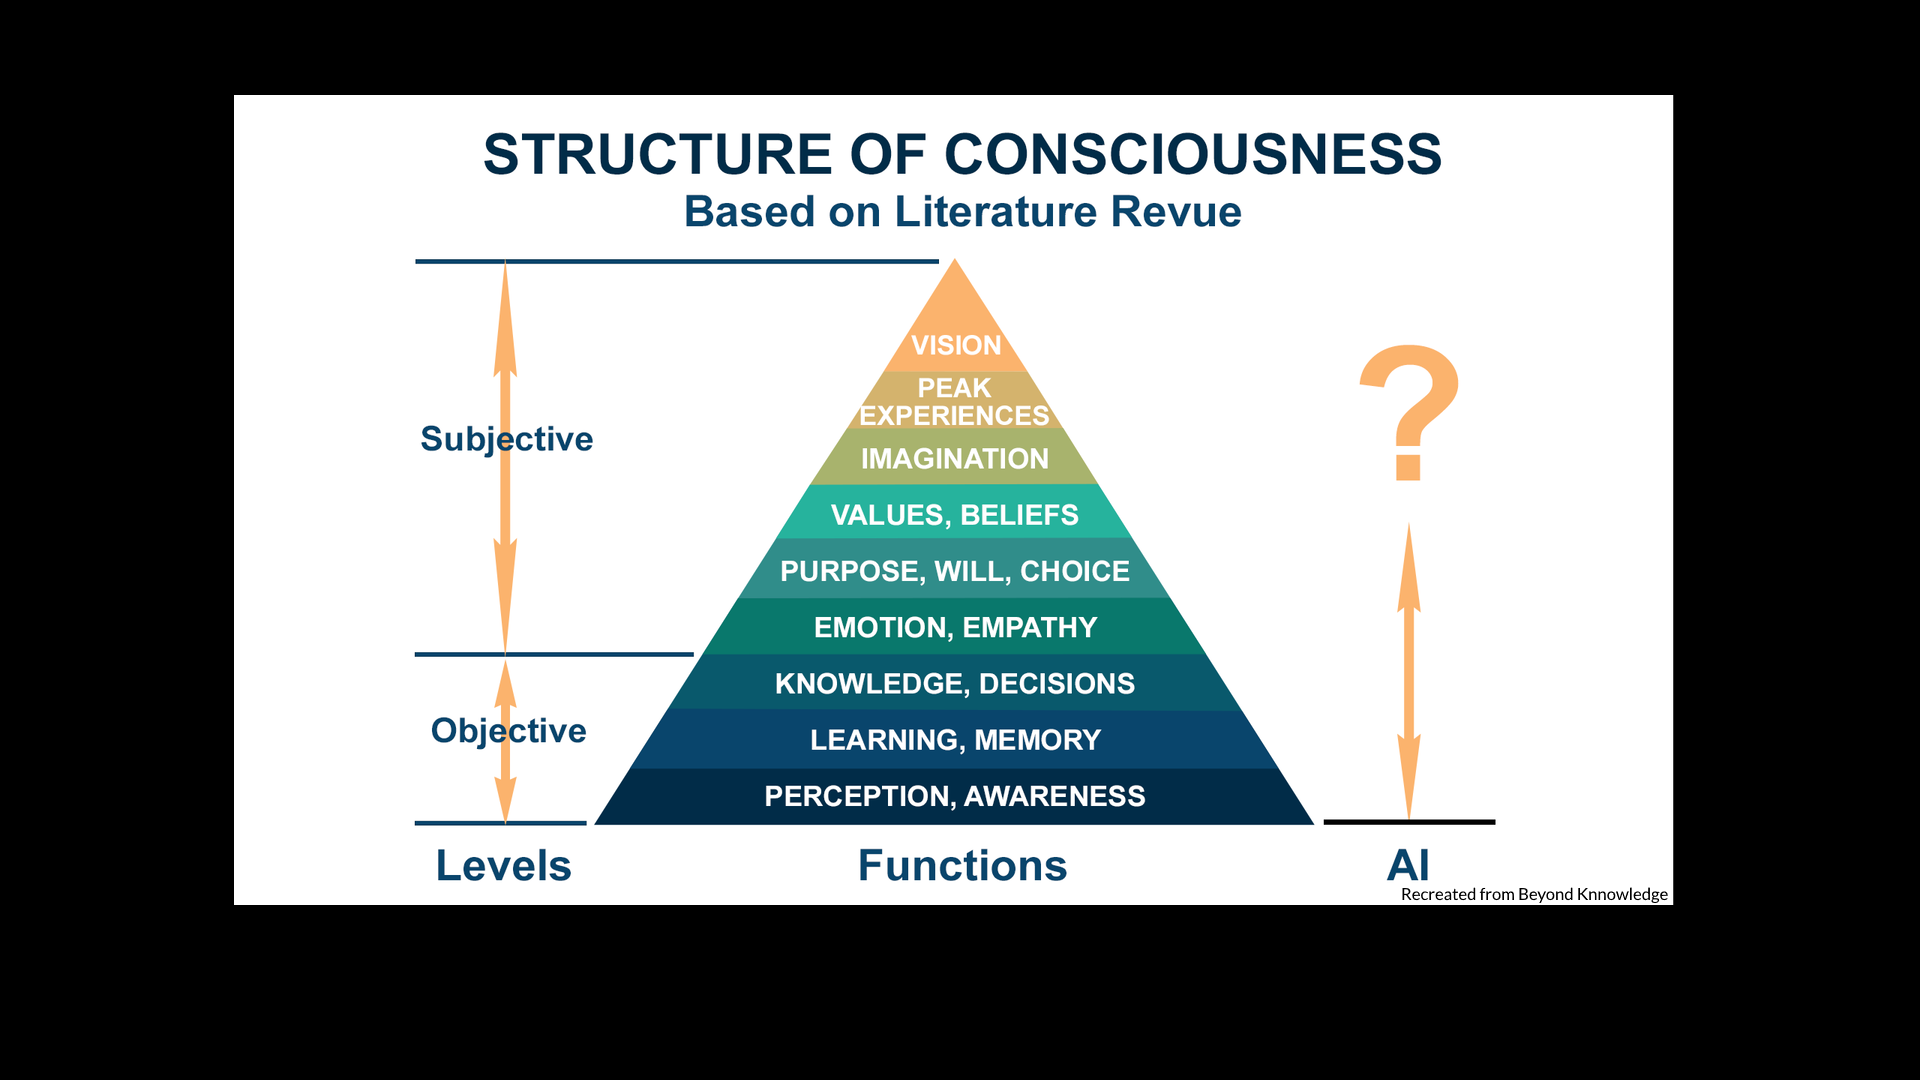 An image describing the structure of consciousness